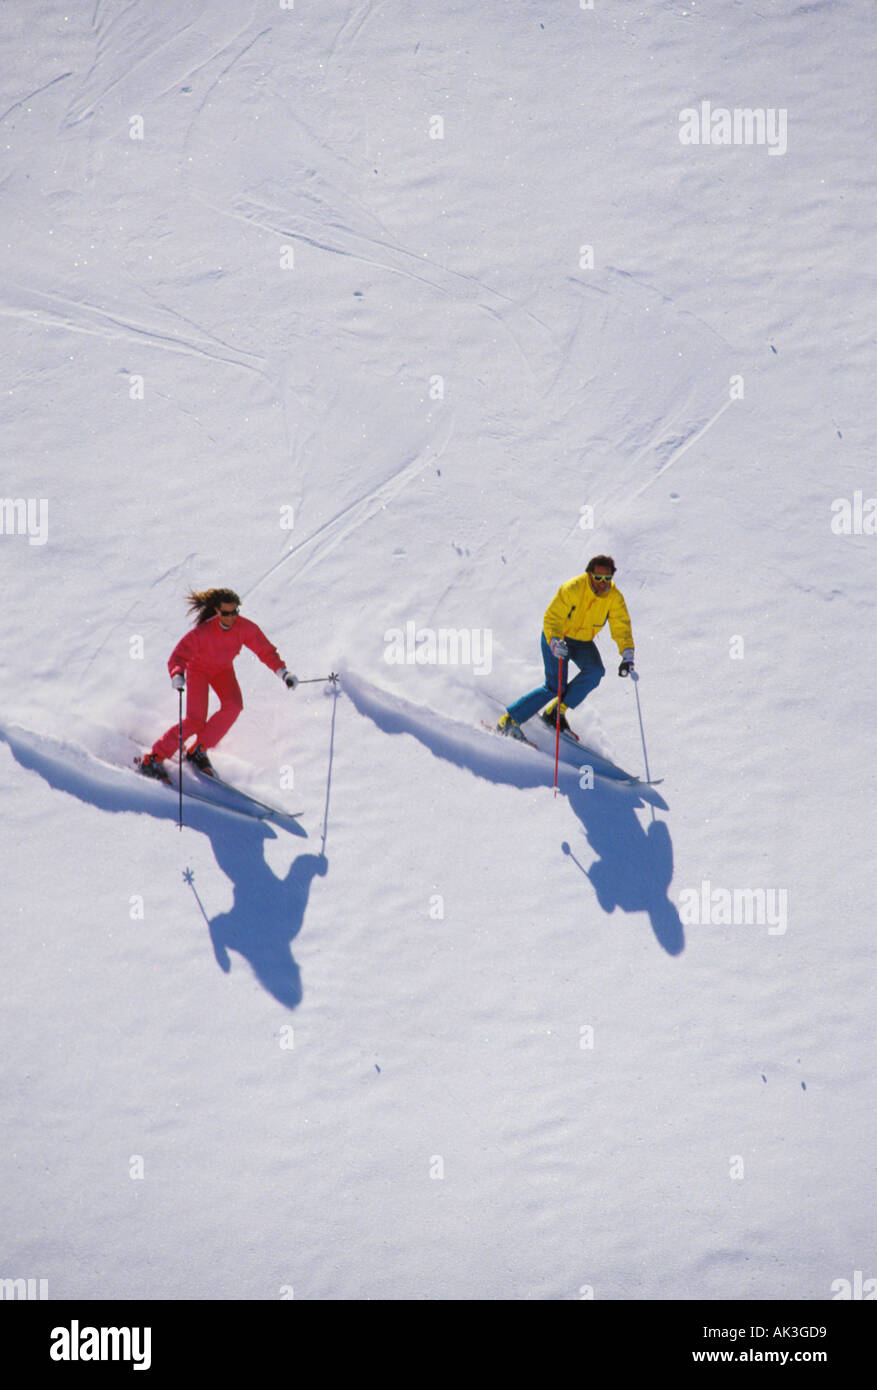 A couple ski an extremely steep slope in perfect unison Stock Photo